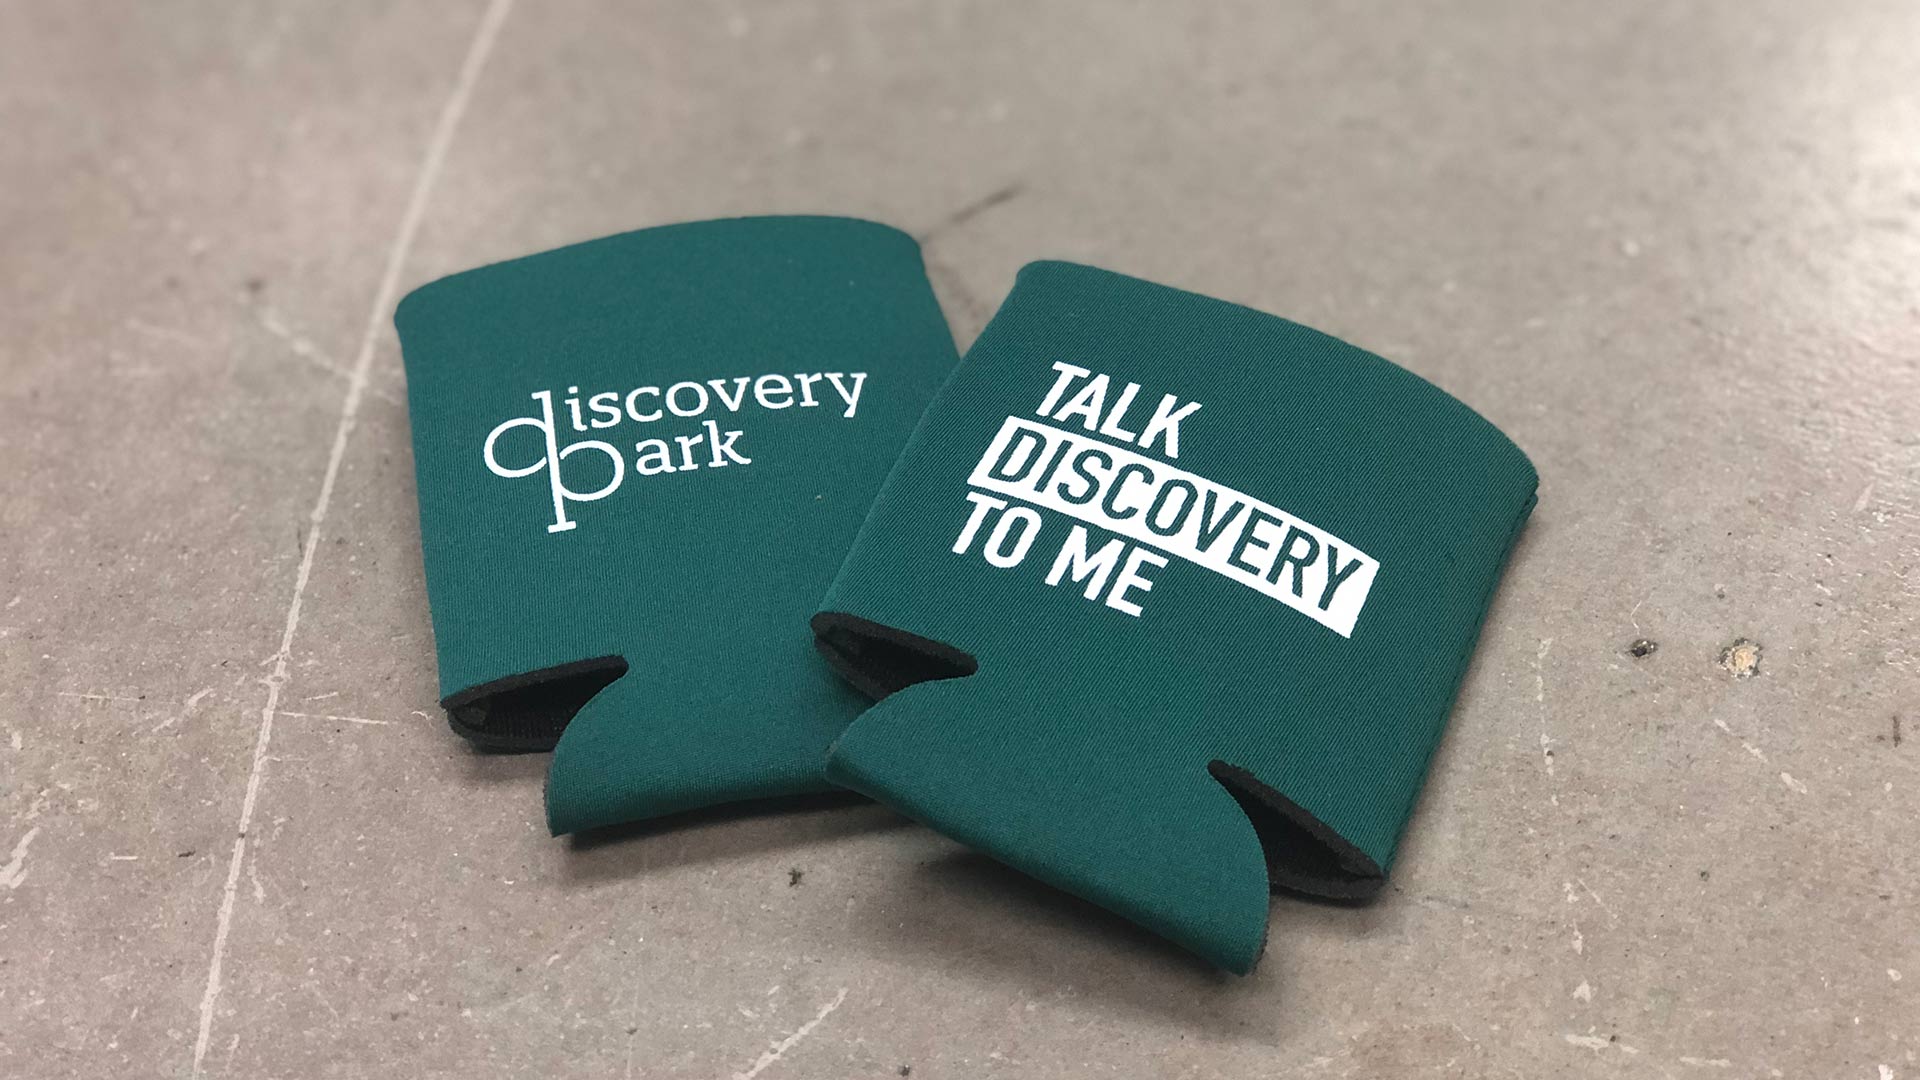 A mock-up image to showcase the Discovery Park swag and multifamily branding that our multifamily marketing agency designed and executed for the client.